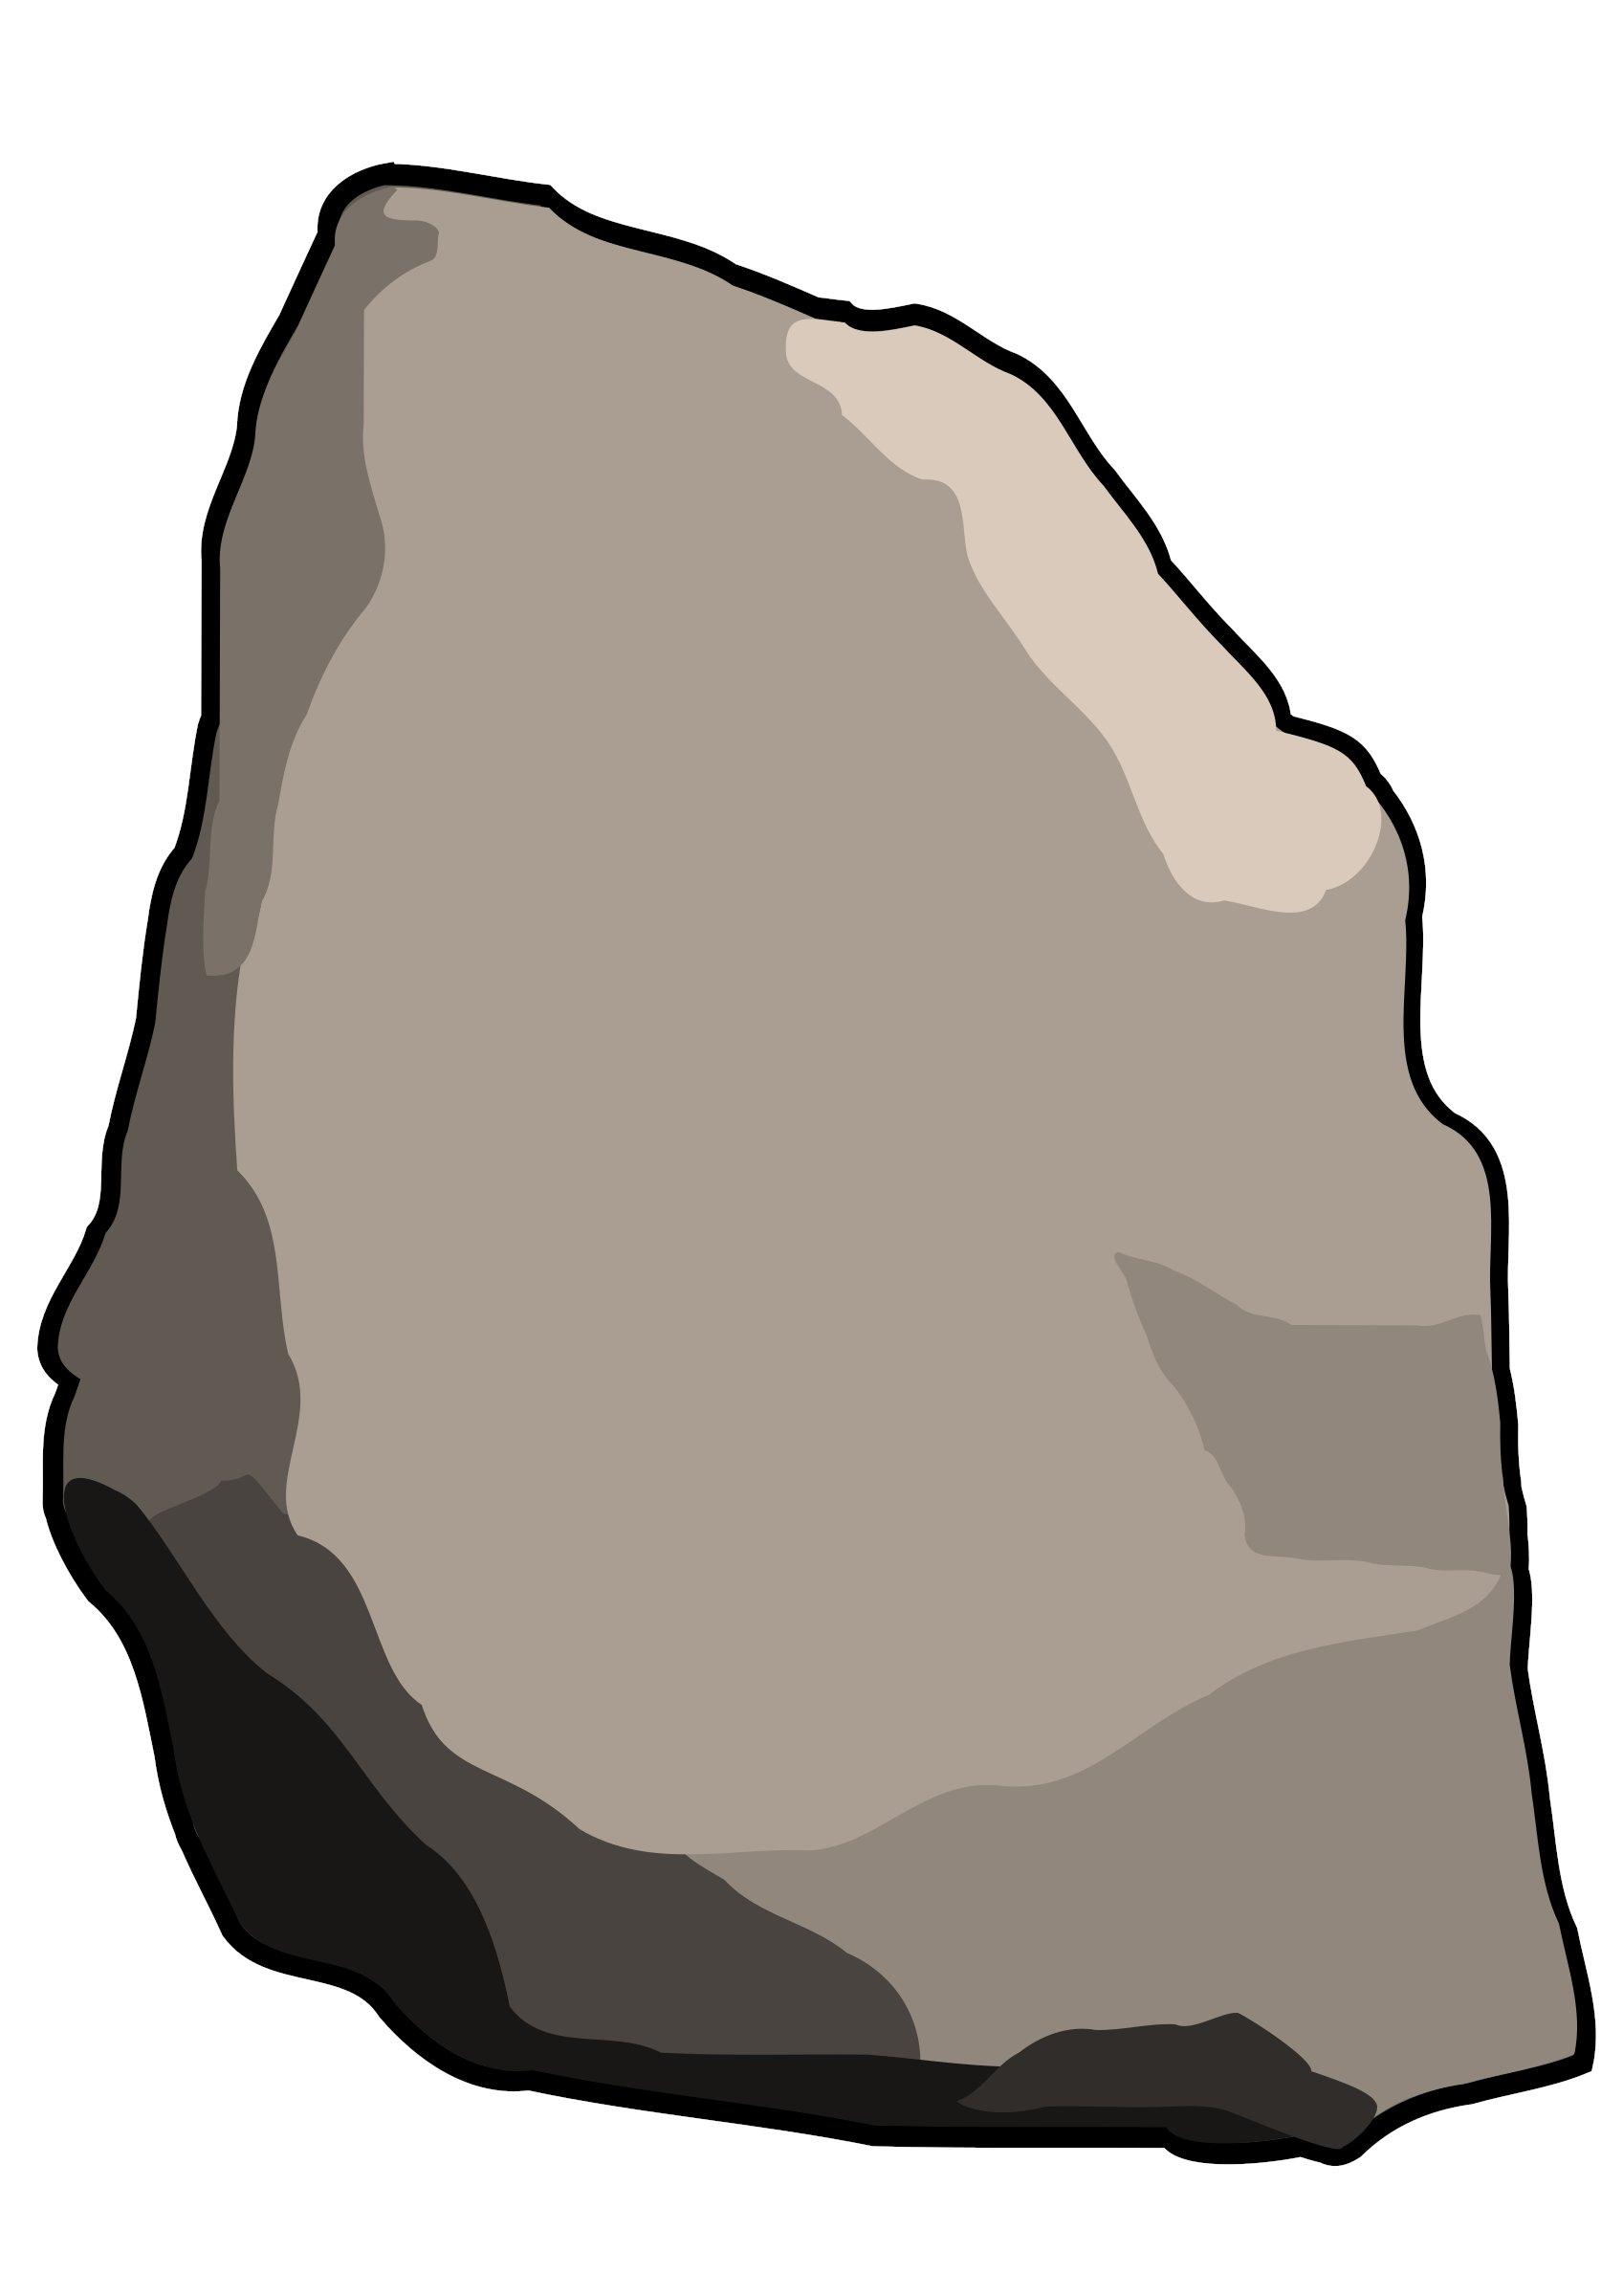 The picture depicts a rock 